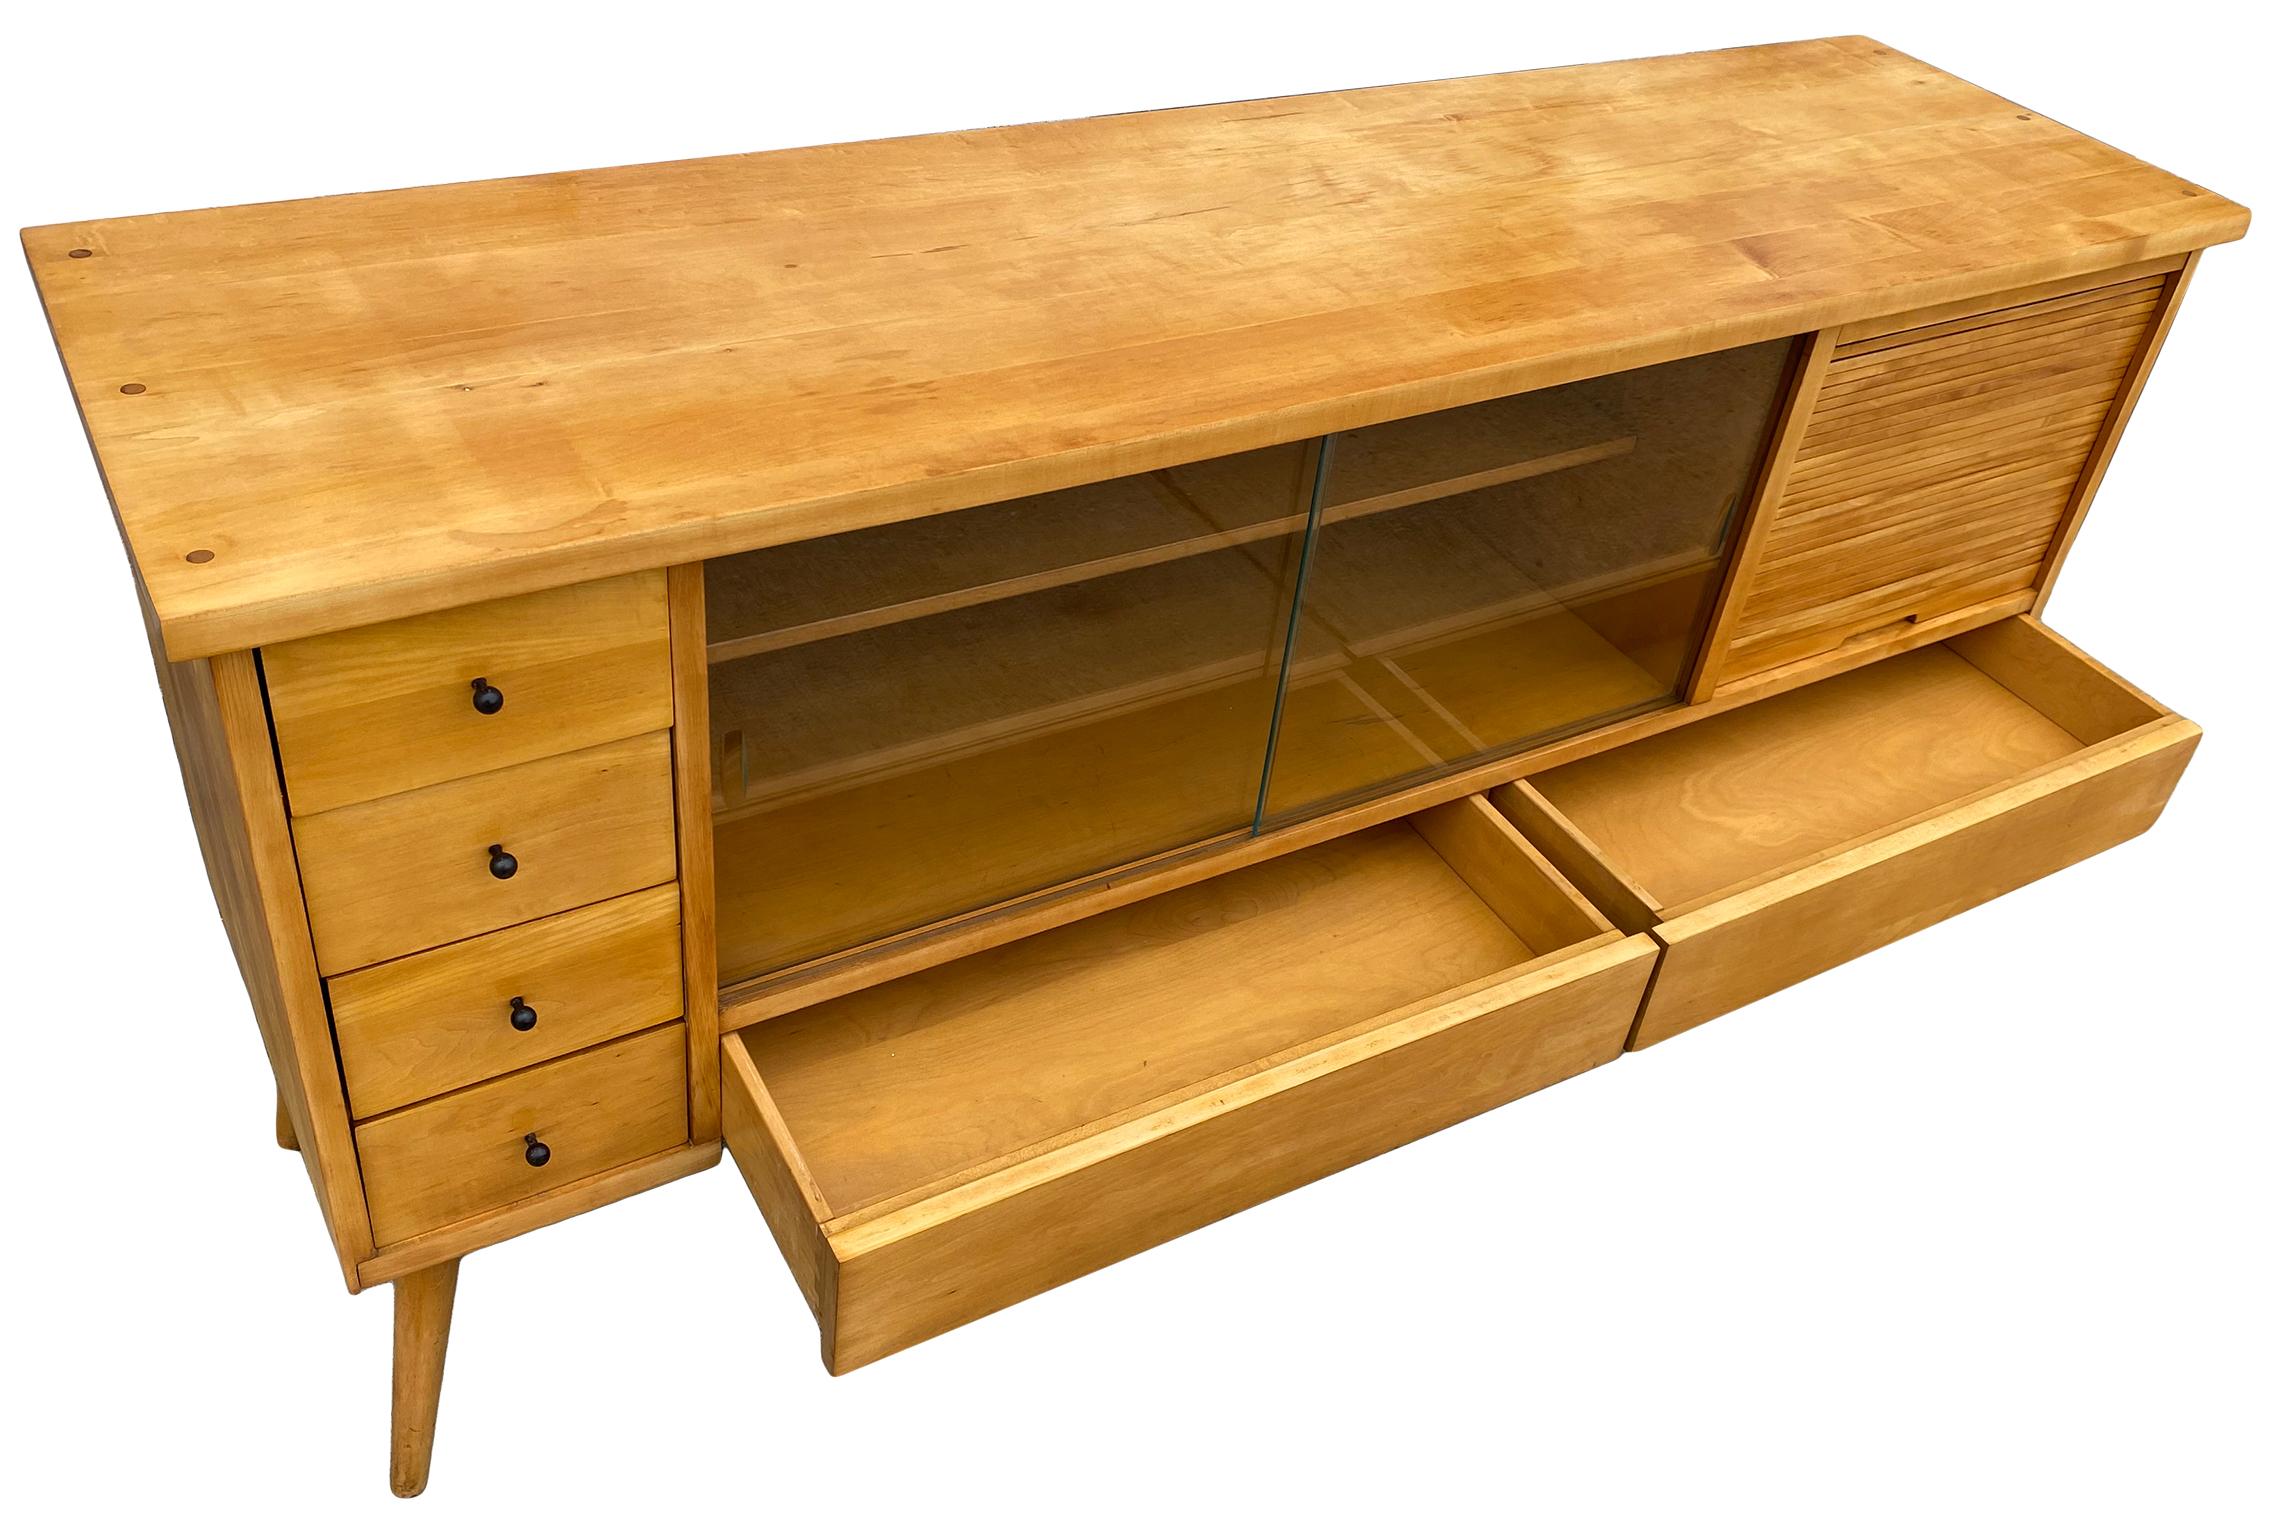 Very Rare Mid-Century Modern Maple Predictor Credenza by Paul McCobb for O’hearn For Sale 1